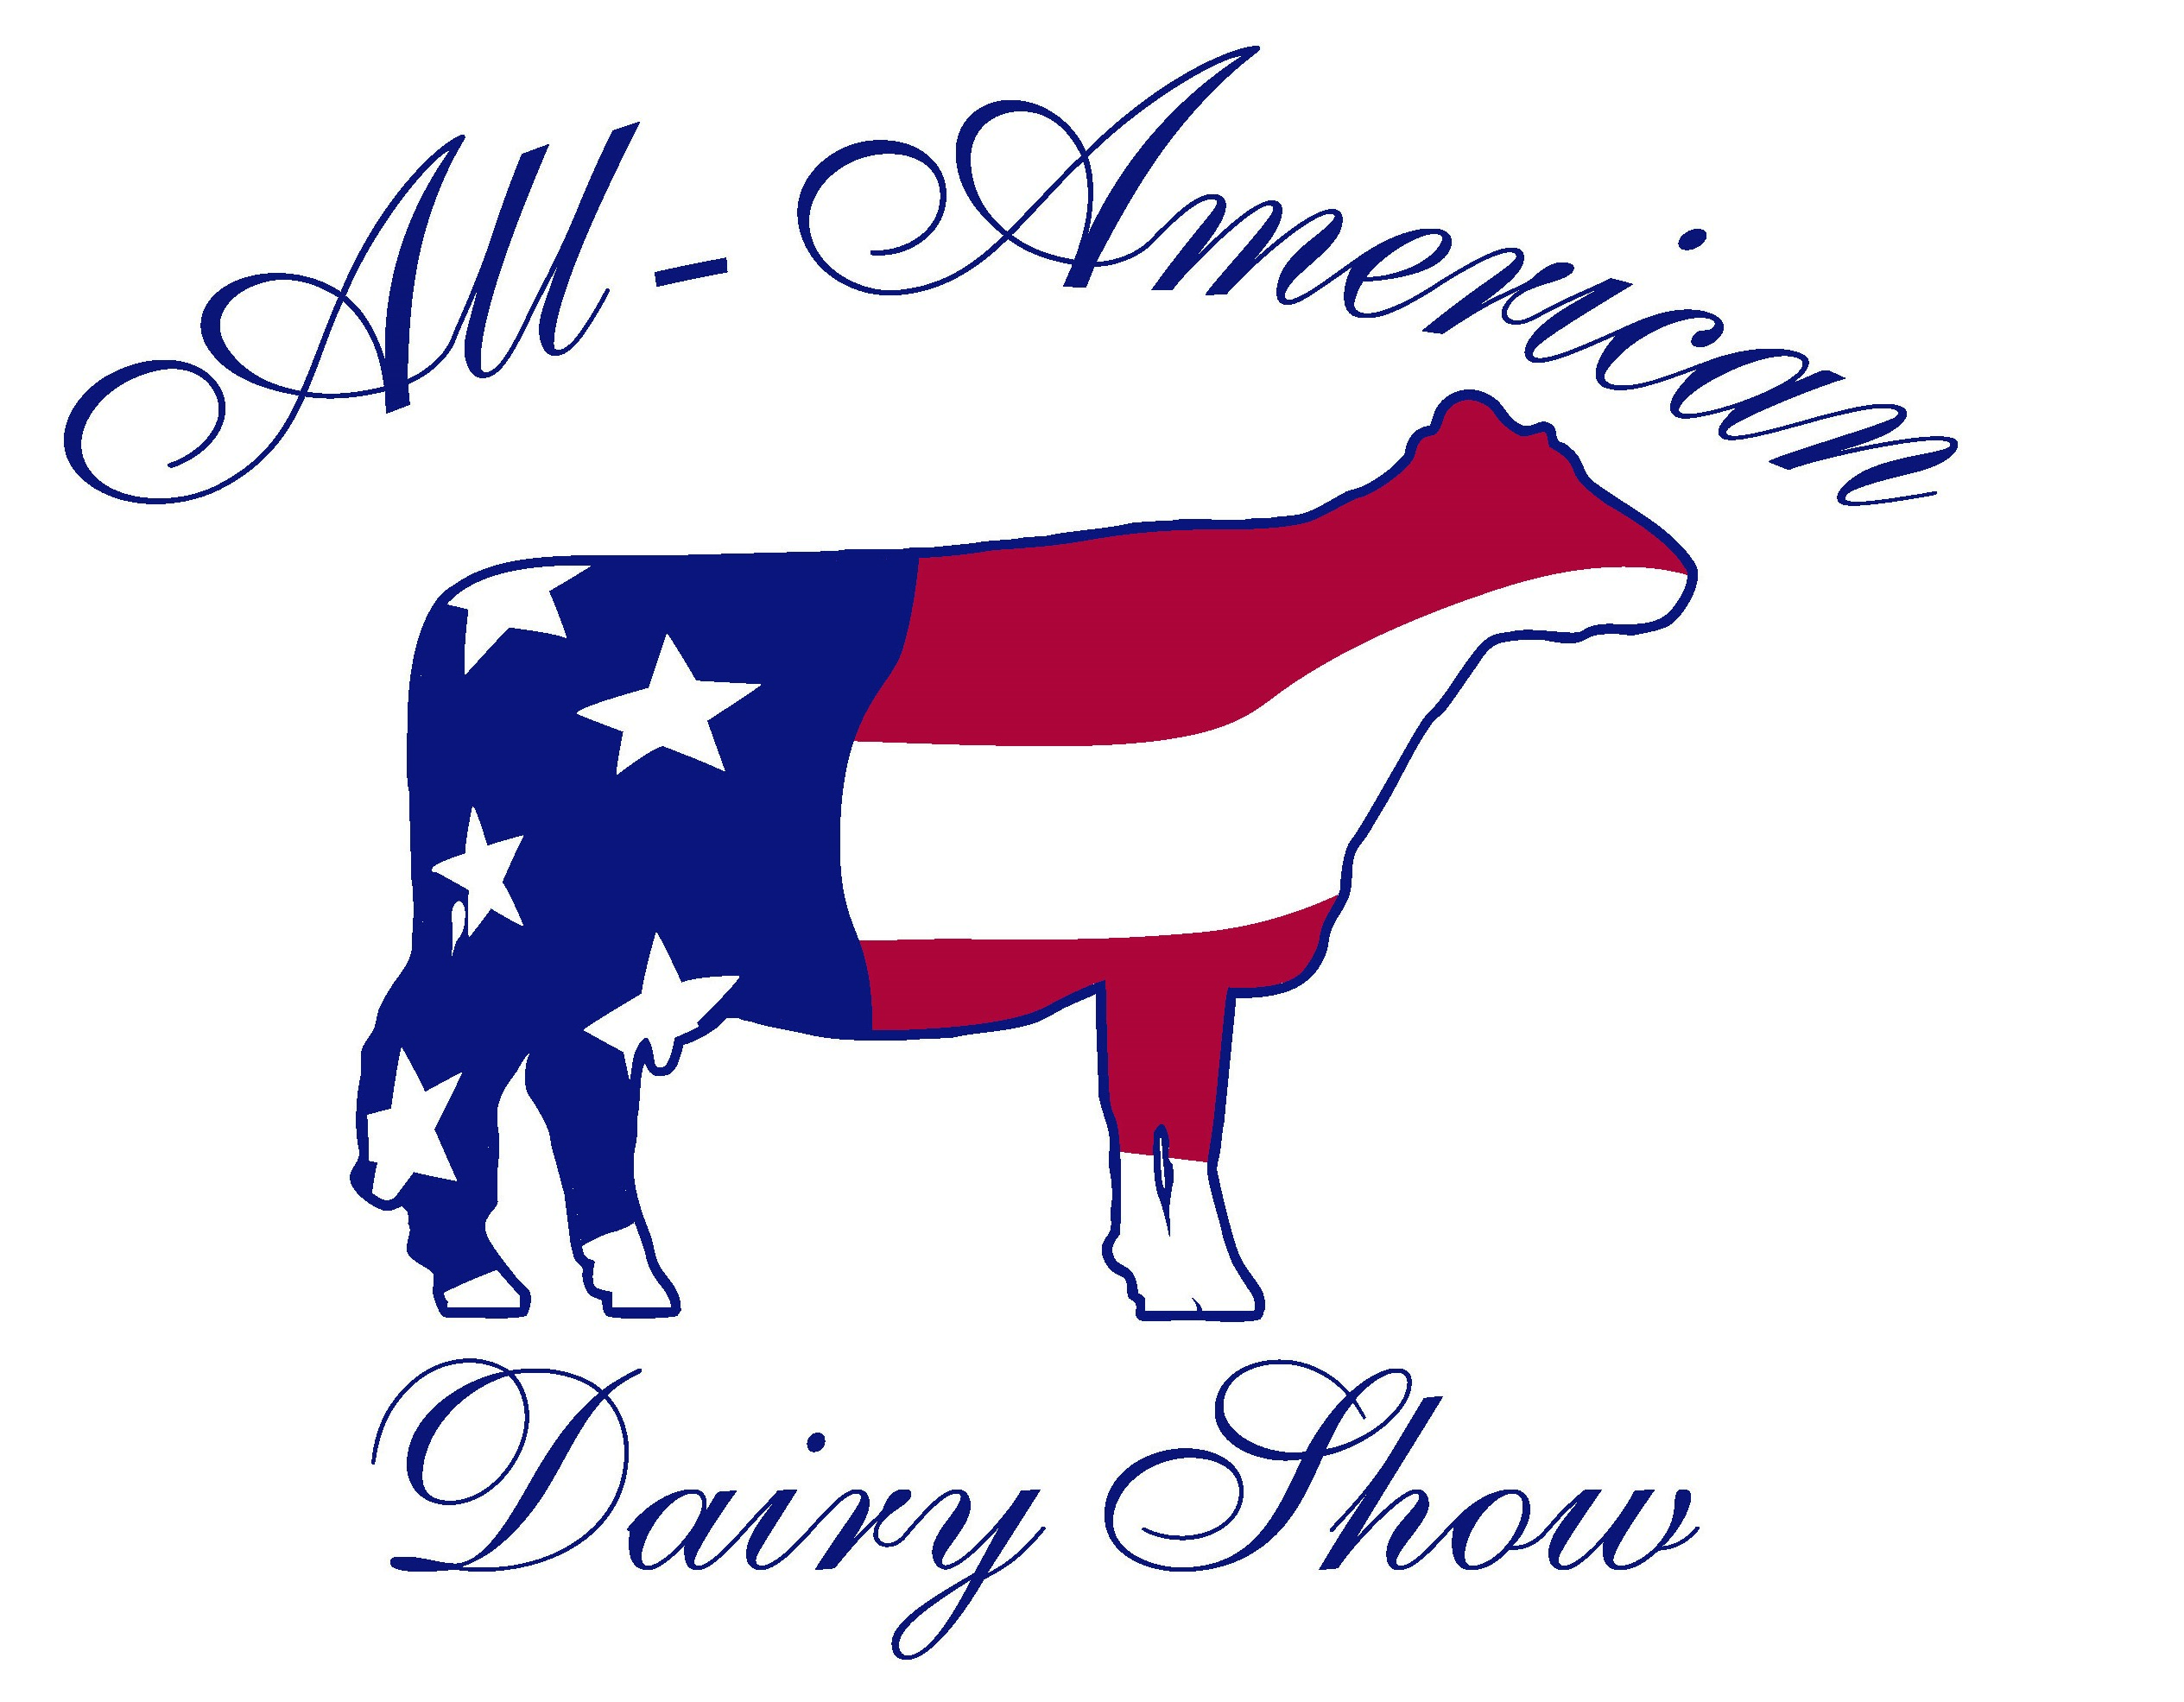 All-American Dairy Show logo